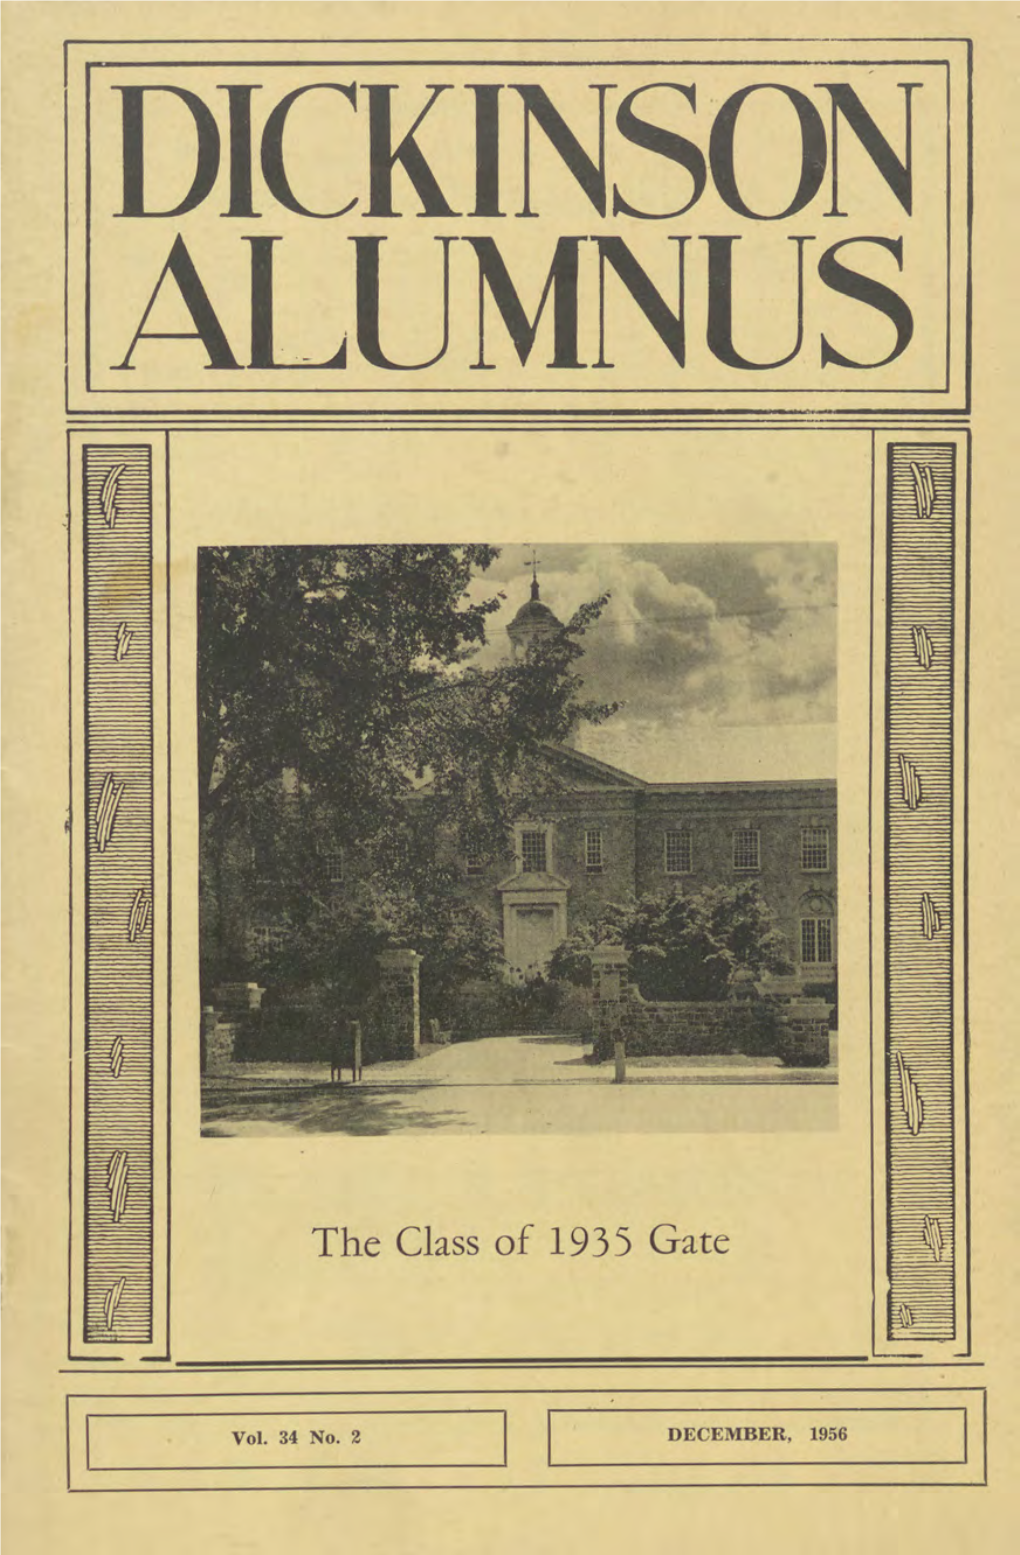 The Class of 1935 Gate